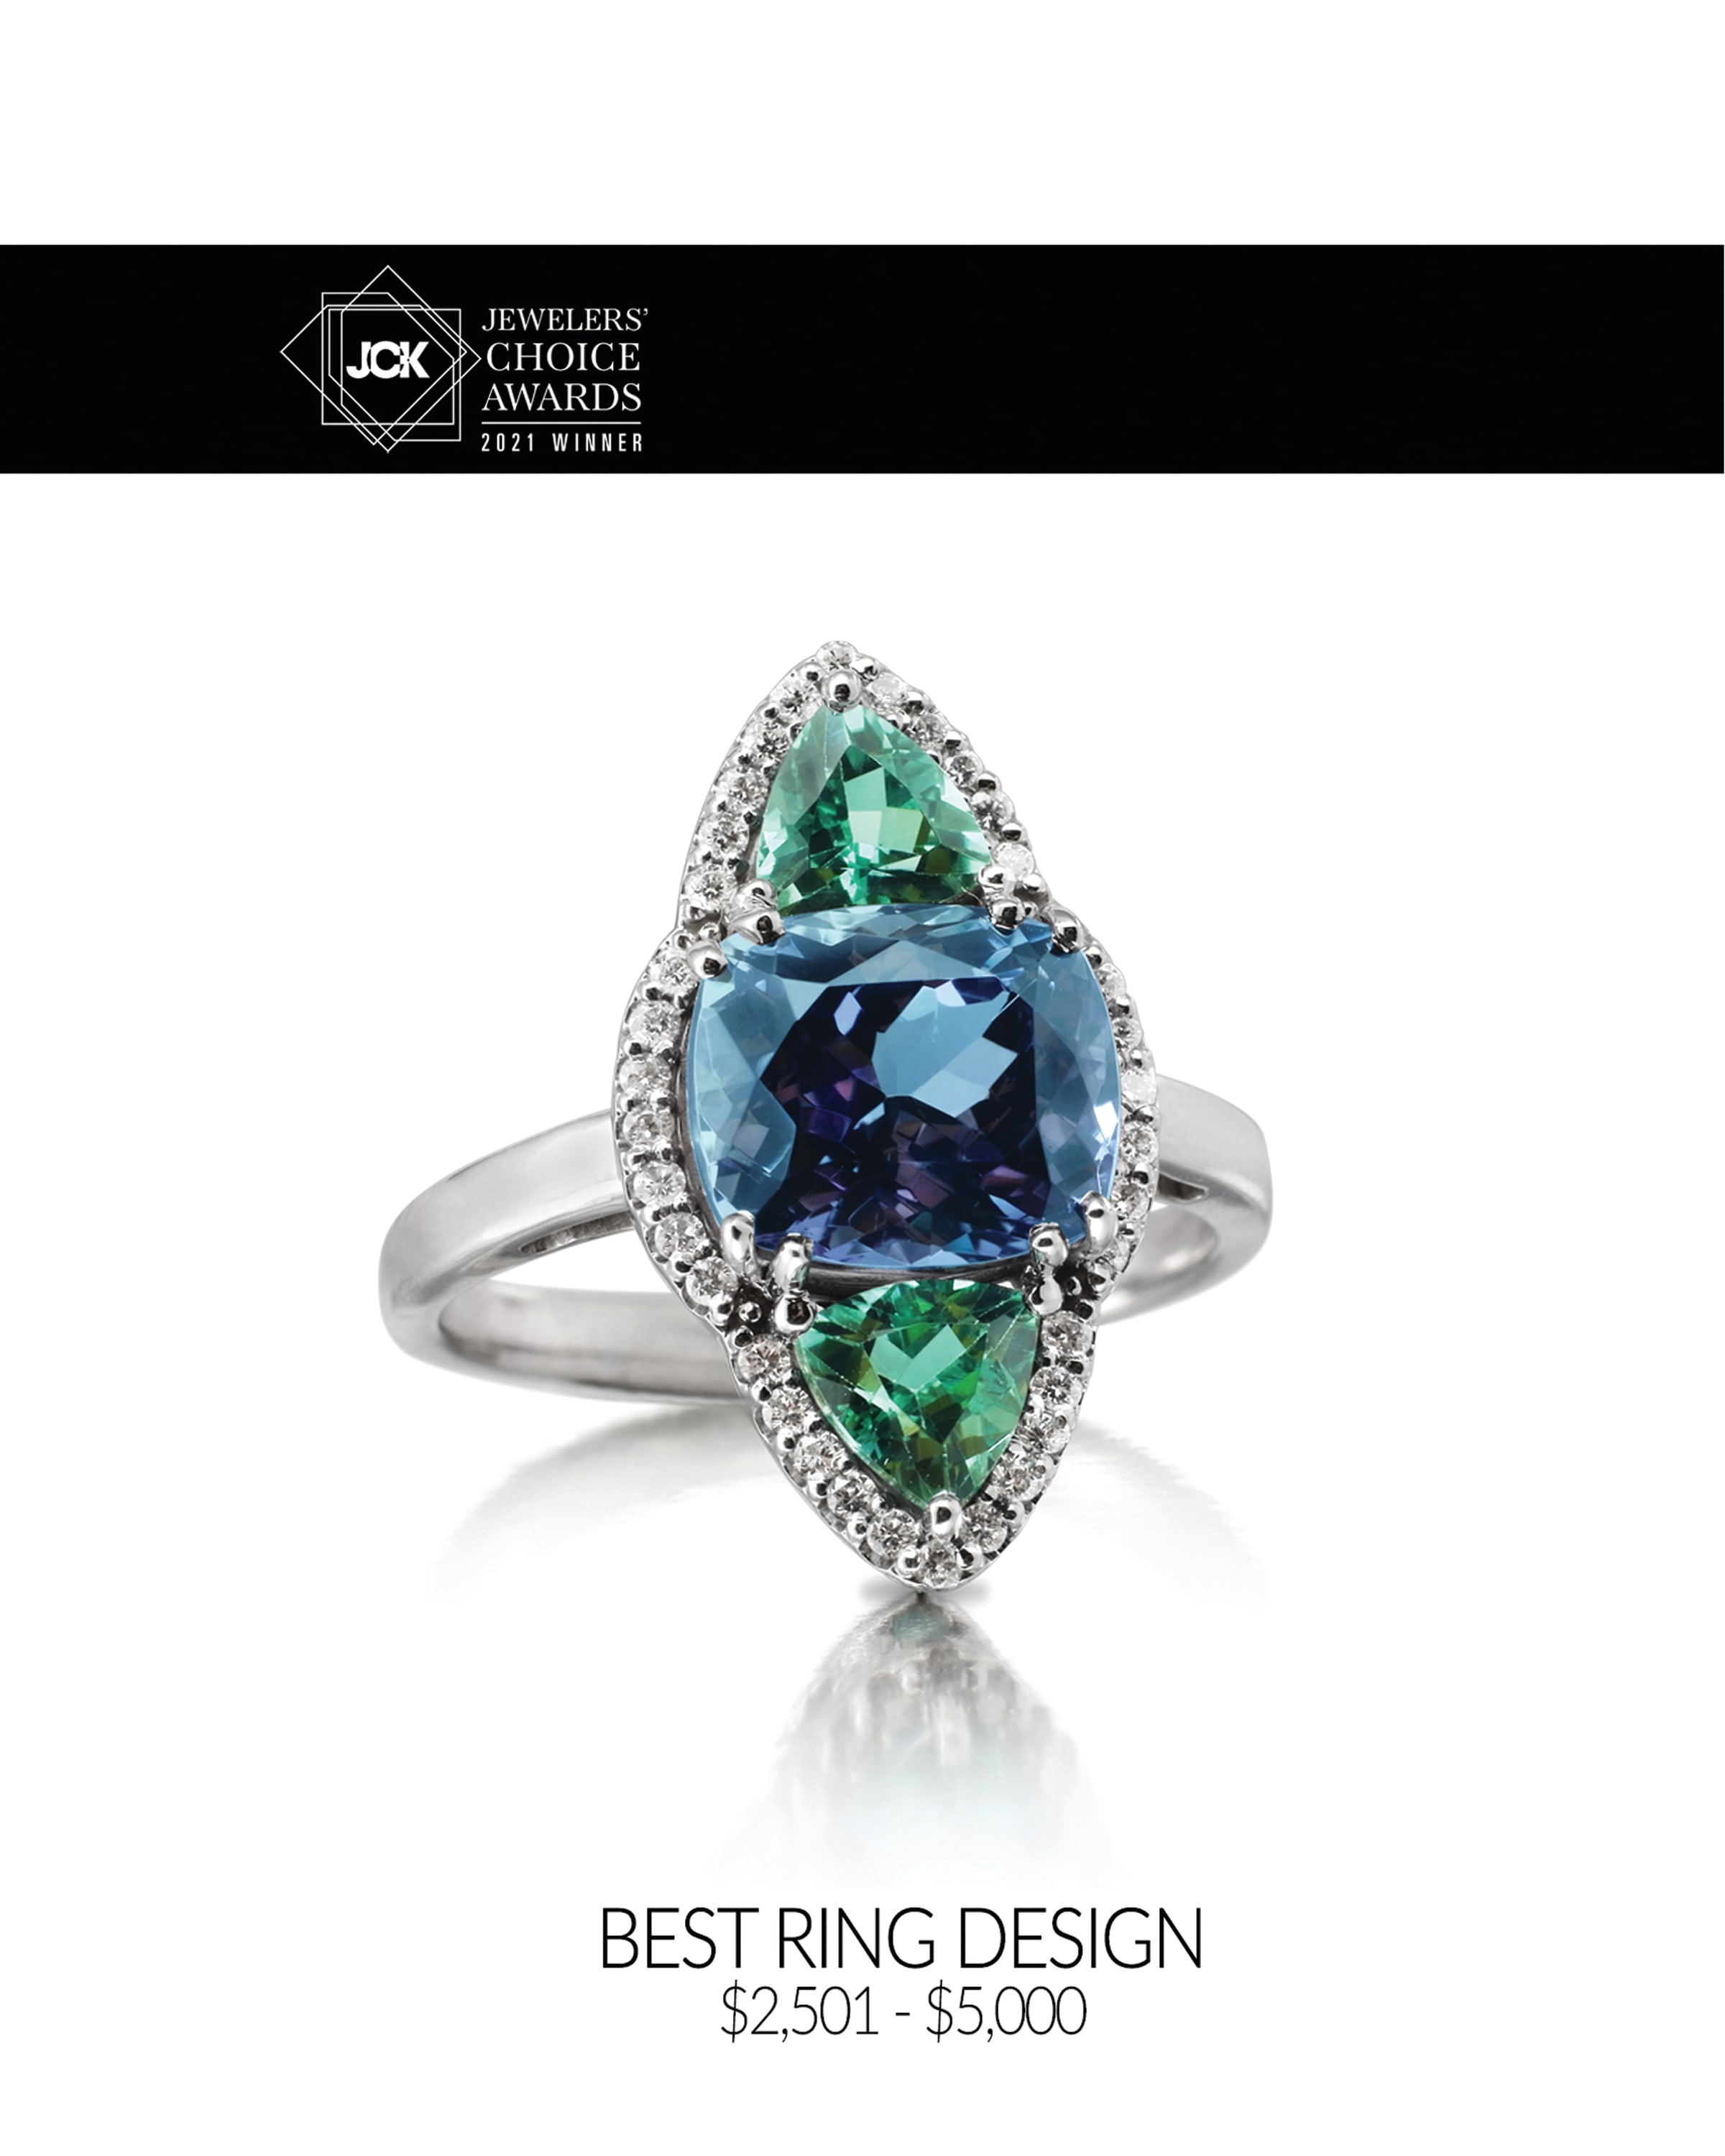 2021 JCK BEST RING DESIGN - $2,501 - $5,000  |
A unique 3.67ct Peacock Tanzanite is flanked by 1.08 ct tw complimentary Mint Tourmalines, all surrounded by 0.22 ct tw of brilliant diamonds. Handcrafted in 100% recycled 14 kt white gold and made in the USA using responsibly sourced gemstones.